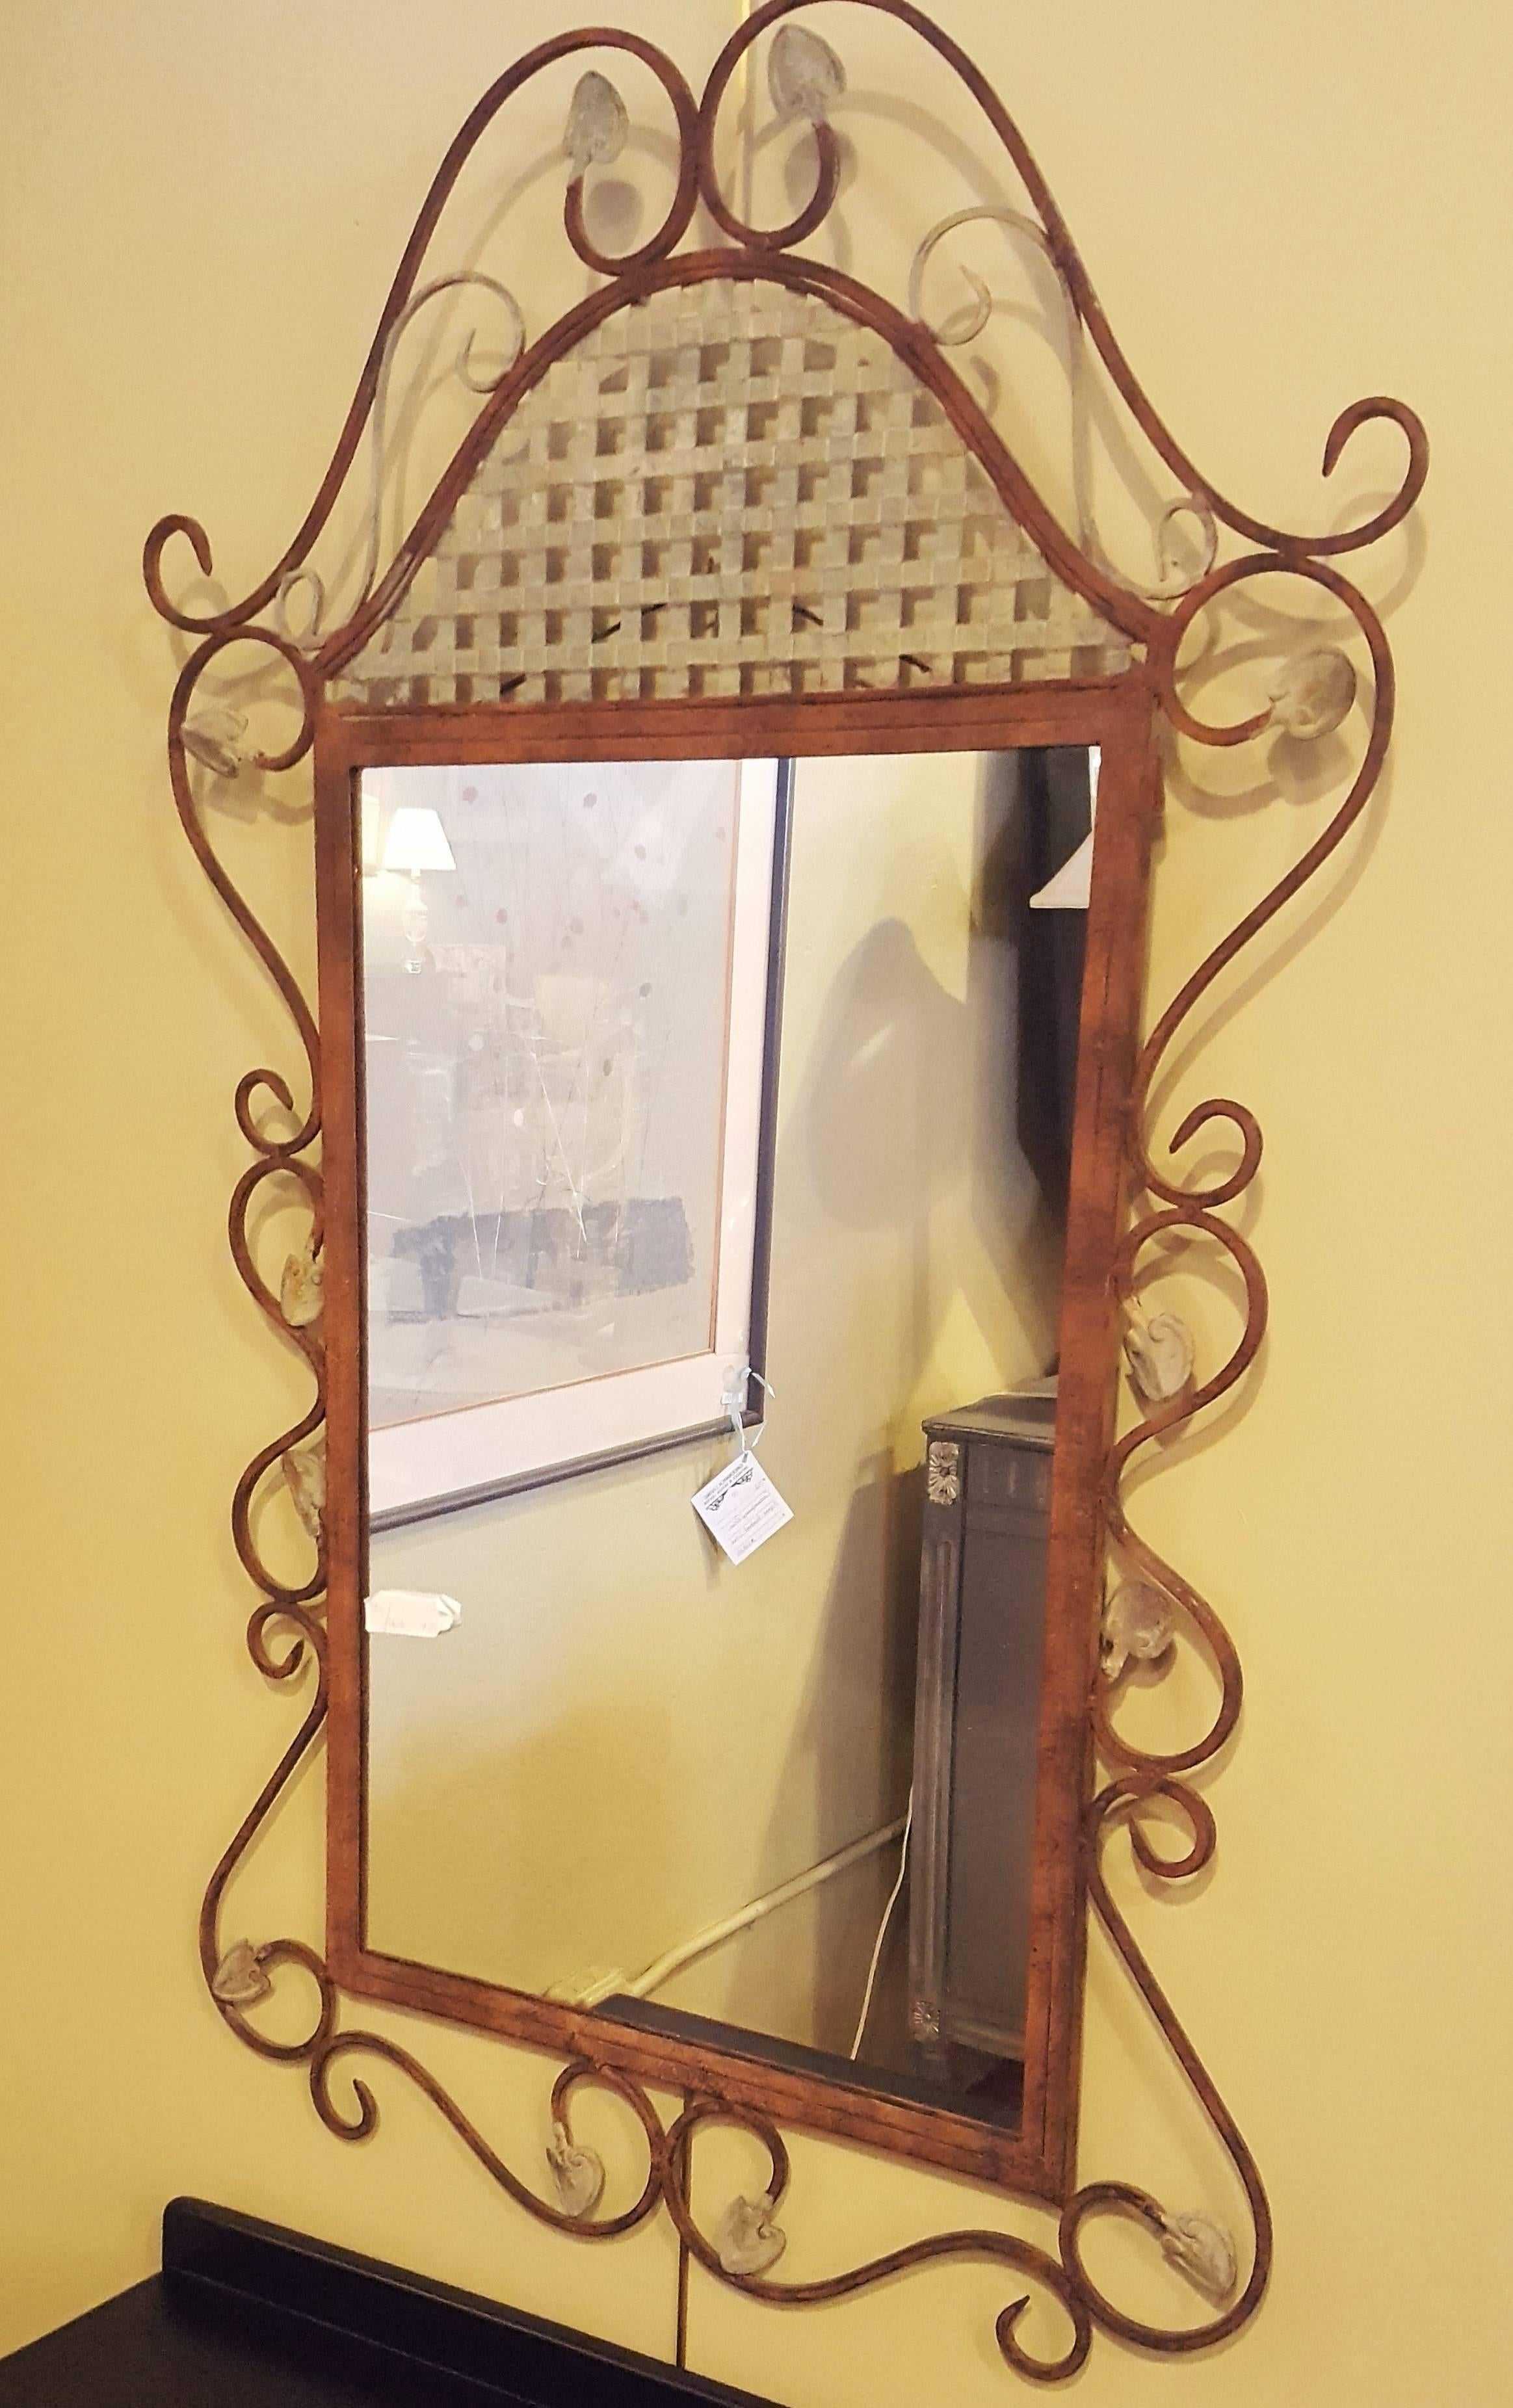 Rustic metal wall mirror. A cute and simple metal wall mirror with decorative scroll design.